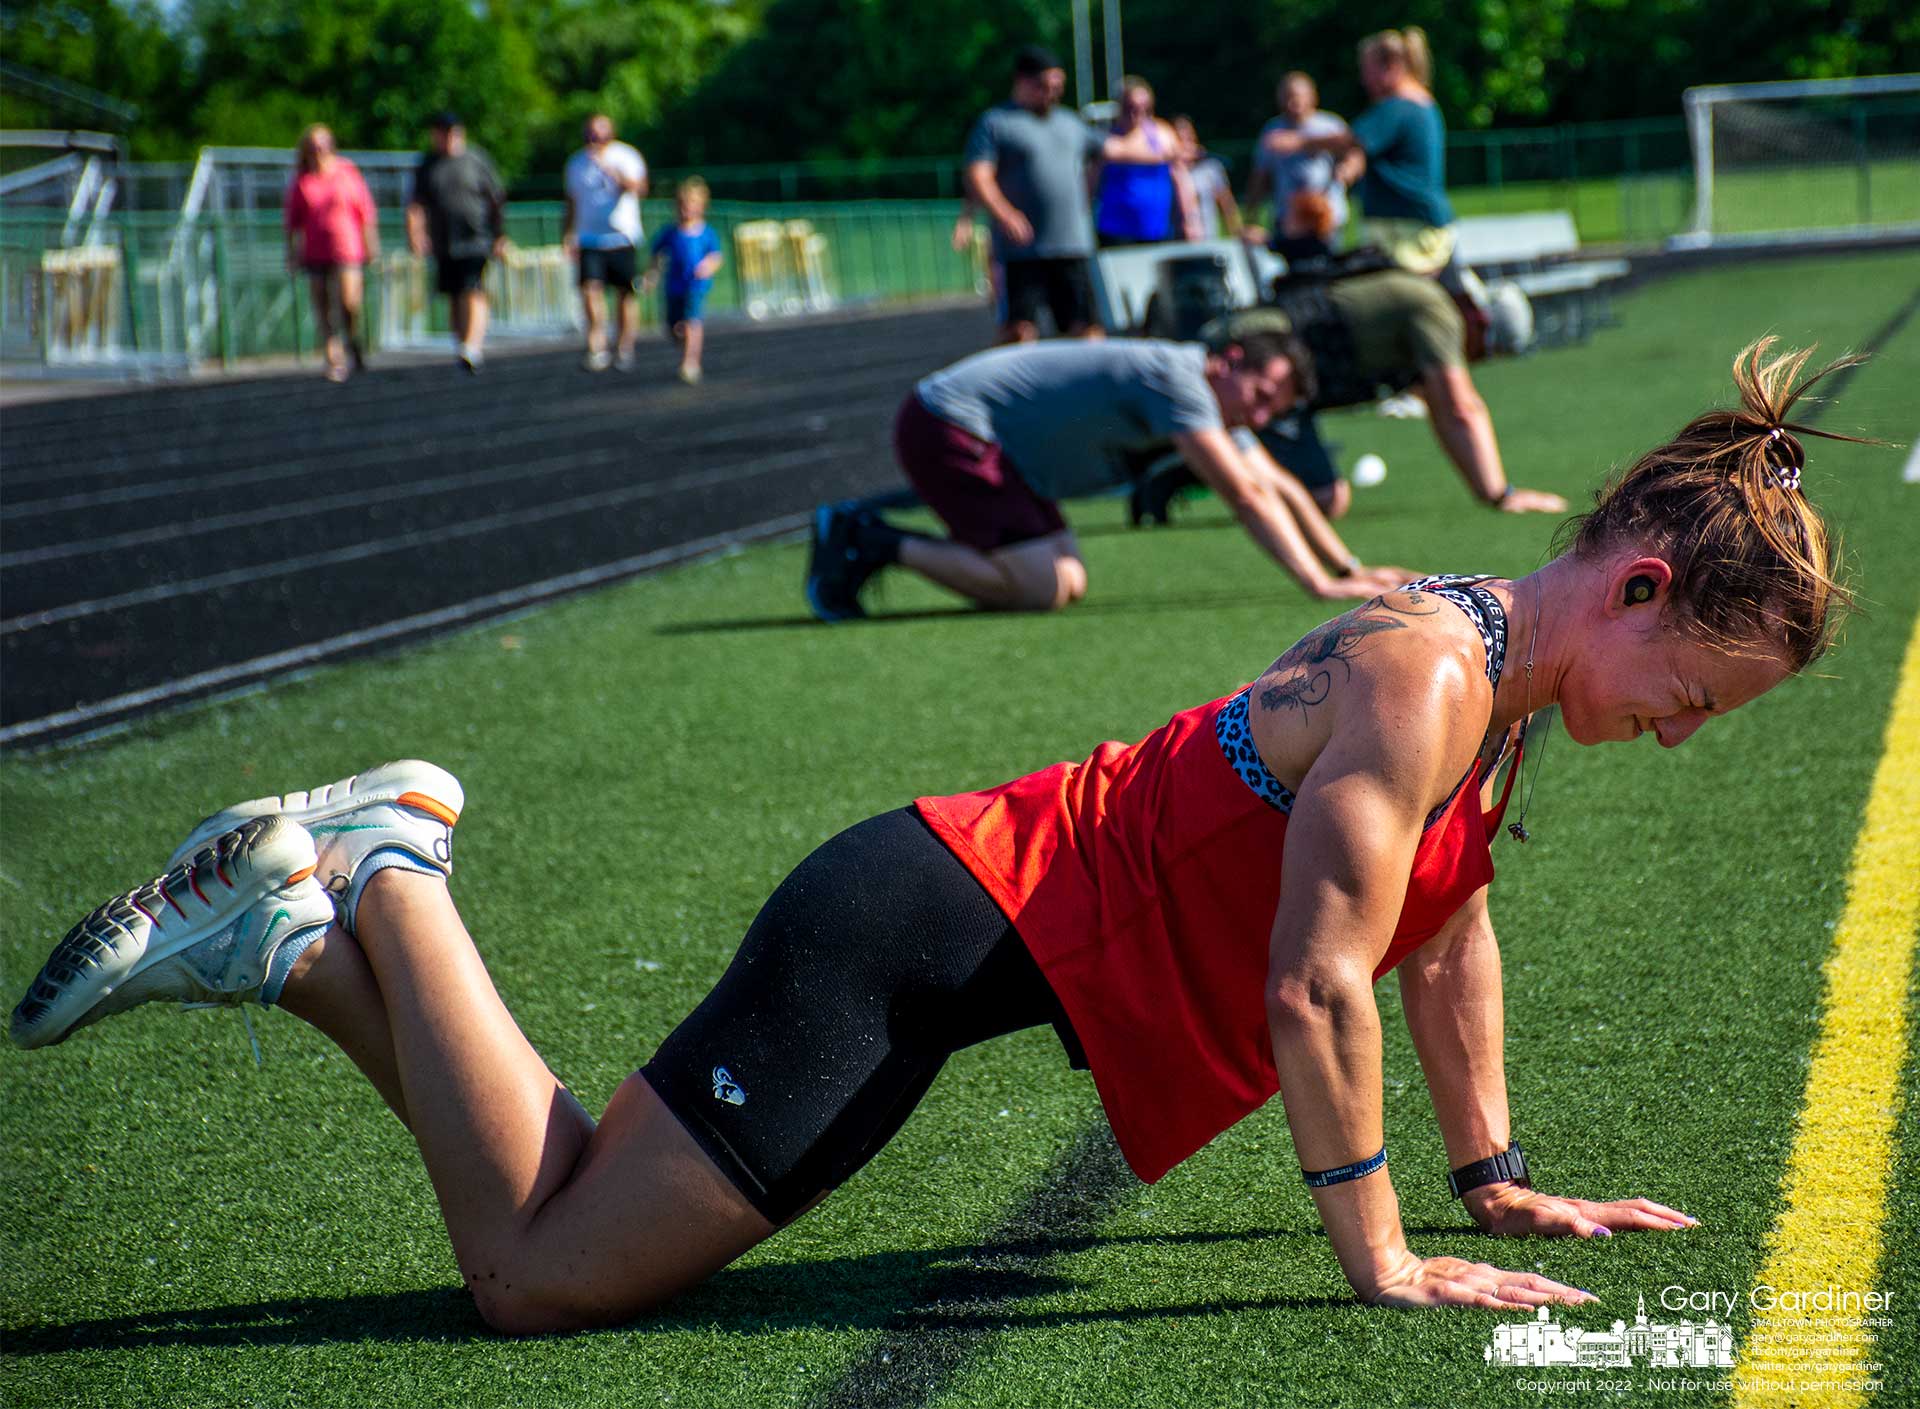 A woman struggles against exhaustion to complete a set of pushups after her 8 laps around the Westerville North High School with each lap followed by a set of squats and pushups to complete the Memorial Day Morelli scholarship fundraiser honoring Anthony P. Morelli, a Westerville police officer who was killed in the line of duty. My Final Photo for May 30, 2022.